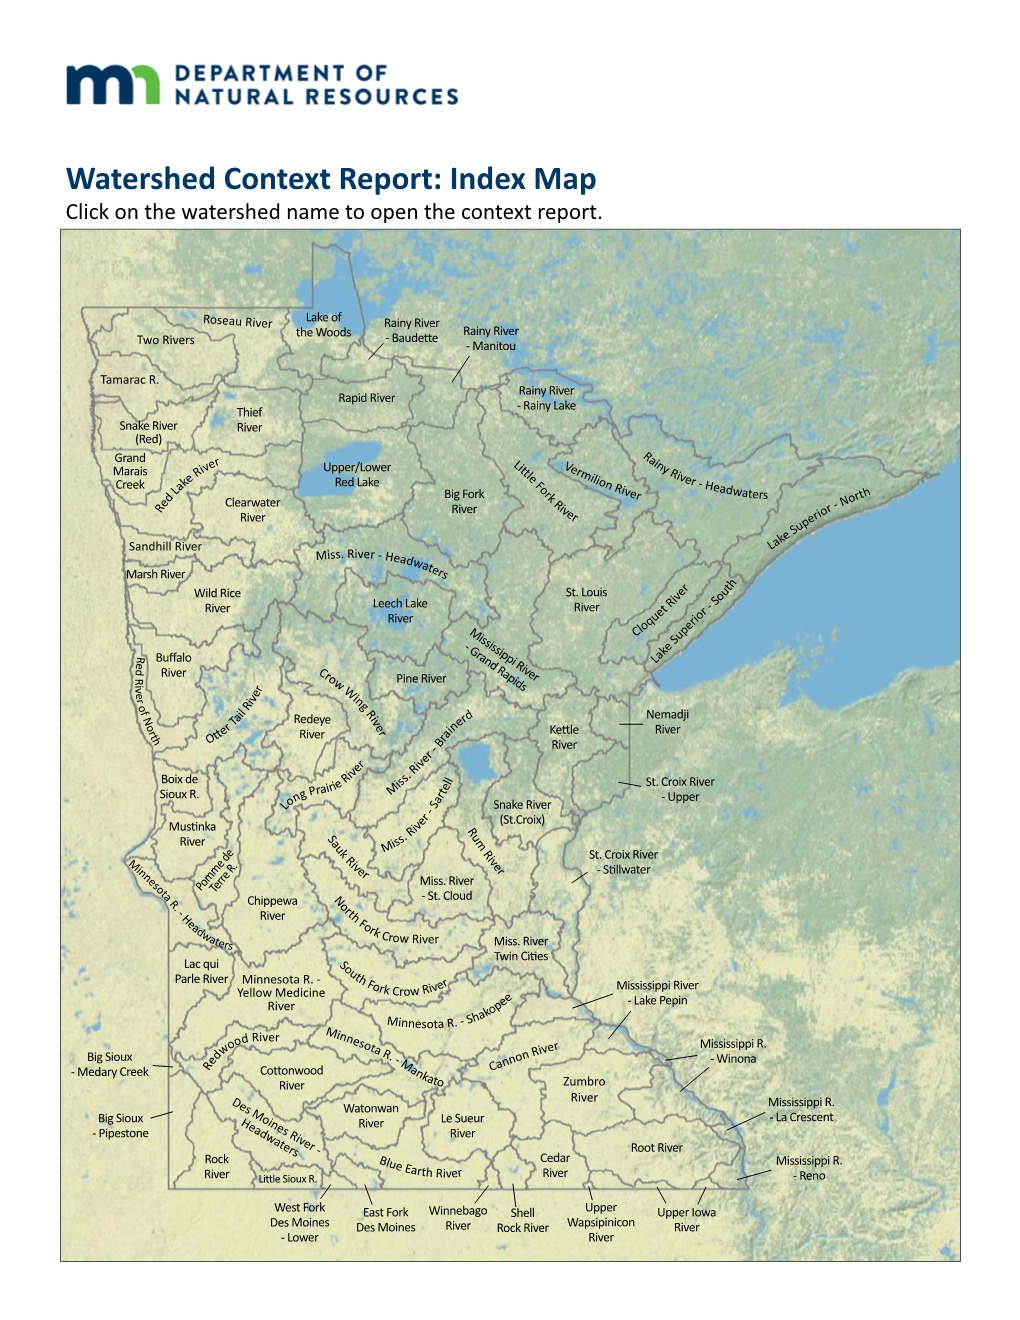 Watershed Context Reports